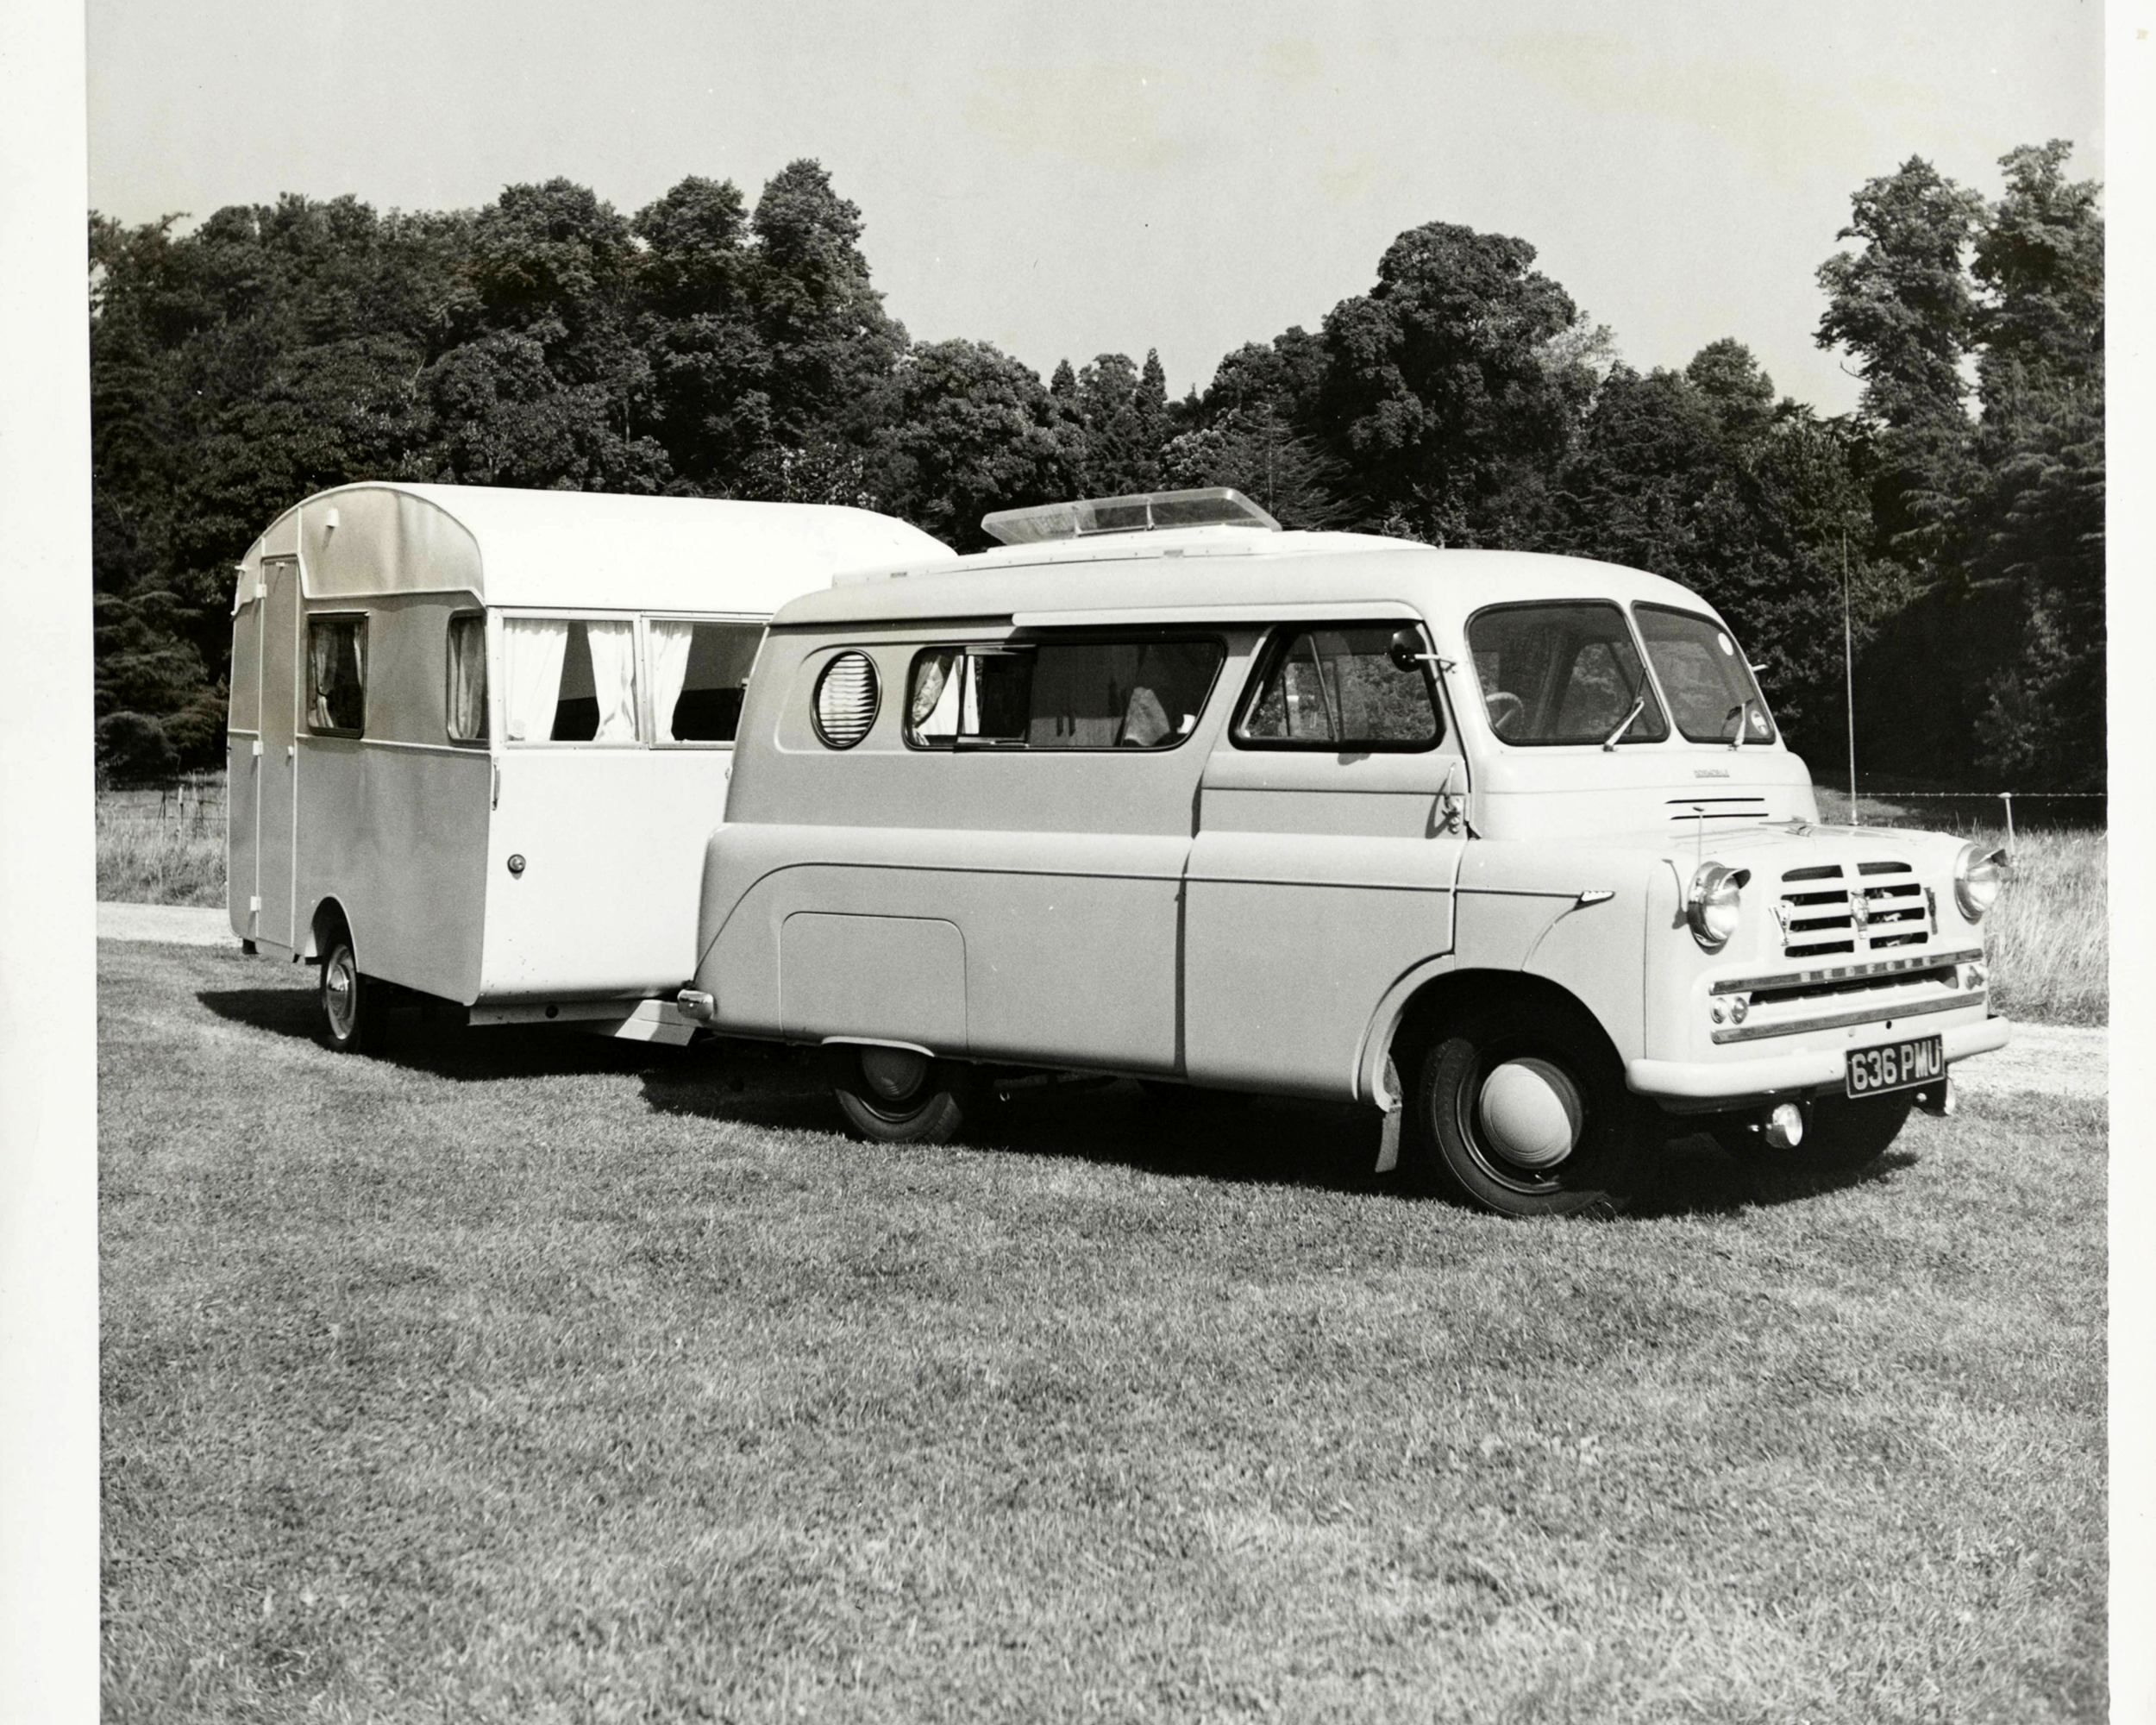 <p>By the 1950s, the industry truly started to come into its own, offering everything from do-it-yourself RVs to luxe 30-foot vehicles. It was around this era that many of today’s well-known RV brands established their businesses. </p>